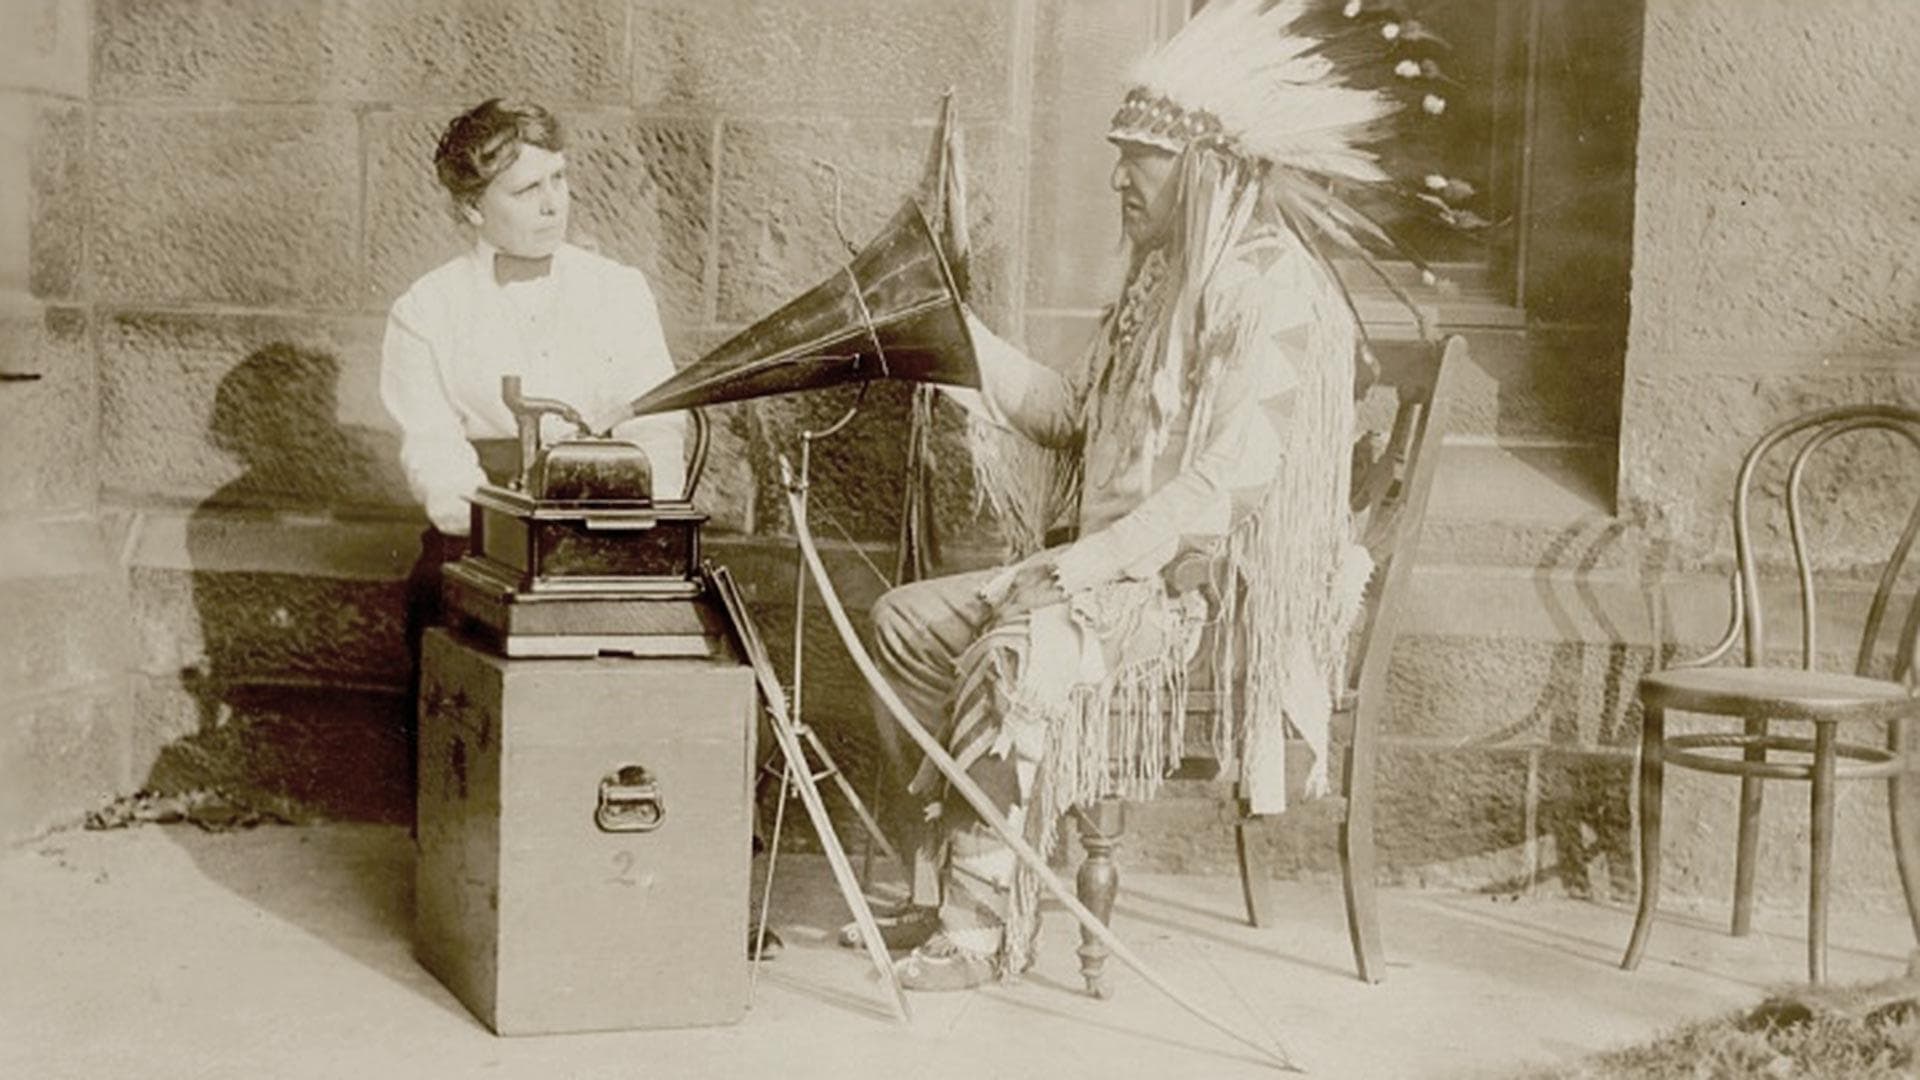 chief in Native dress with bow, arrows and lance listens to song being played on phonograph